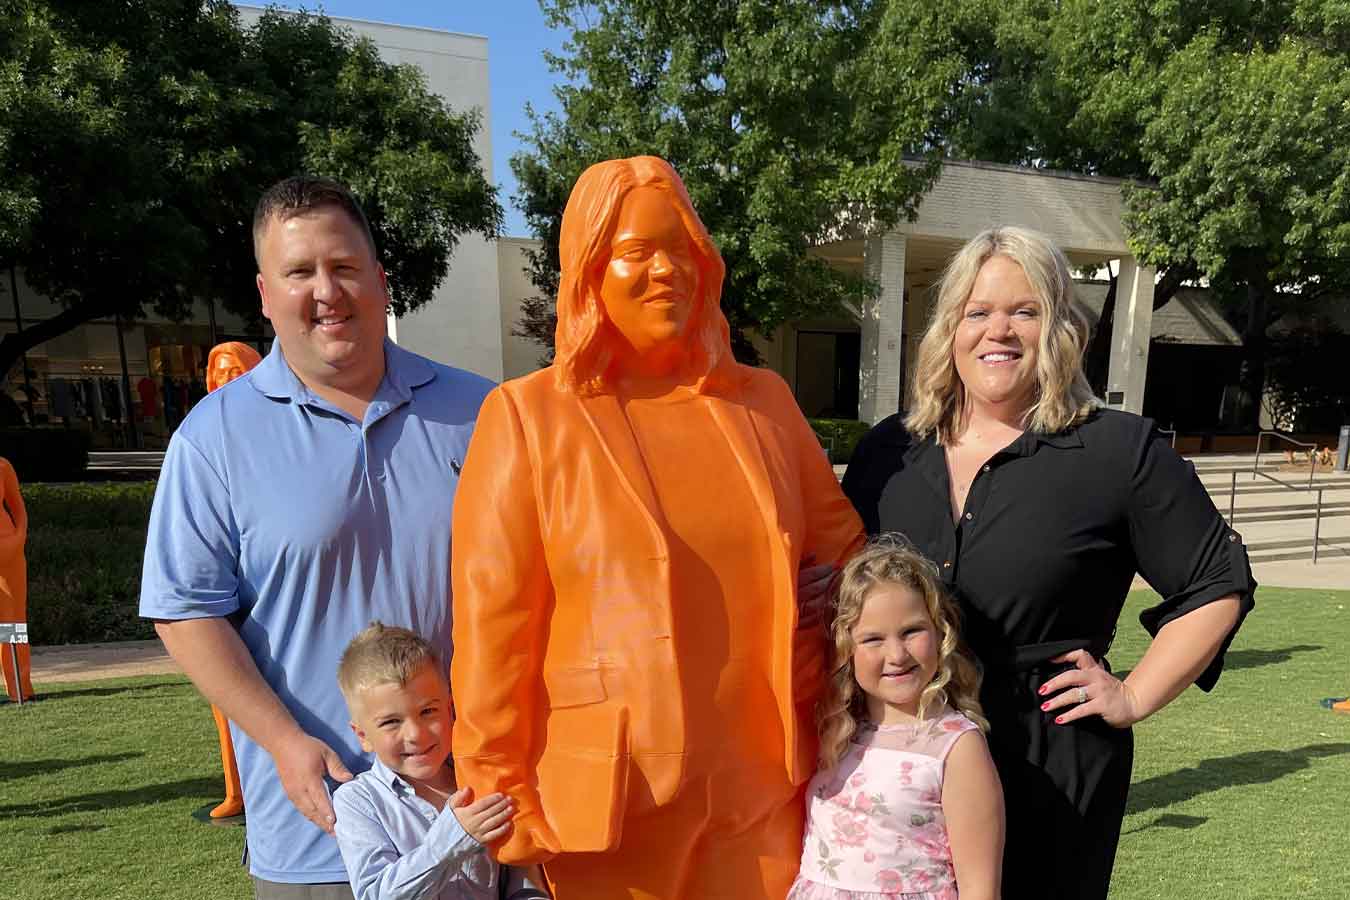 Dr. Ashley Podhradsky (right) poses with her family with her life-size statue,  which will be featured at the Smithsonian Institute in Washington, D.C. for Women’s Futures Month.